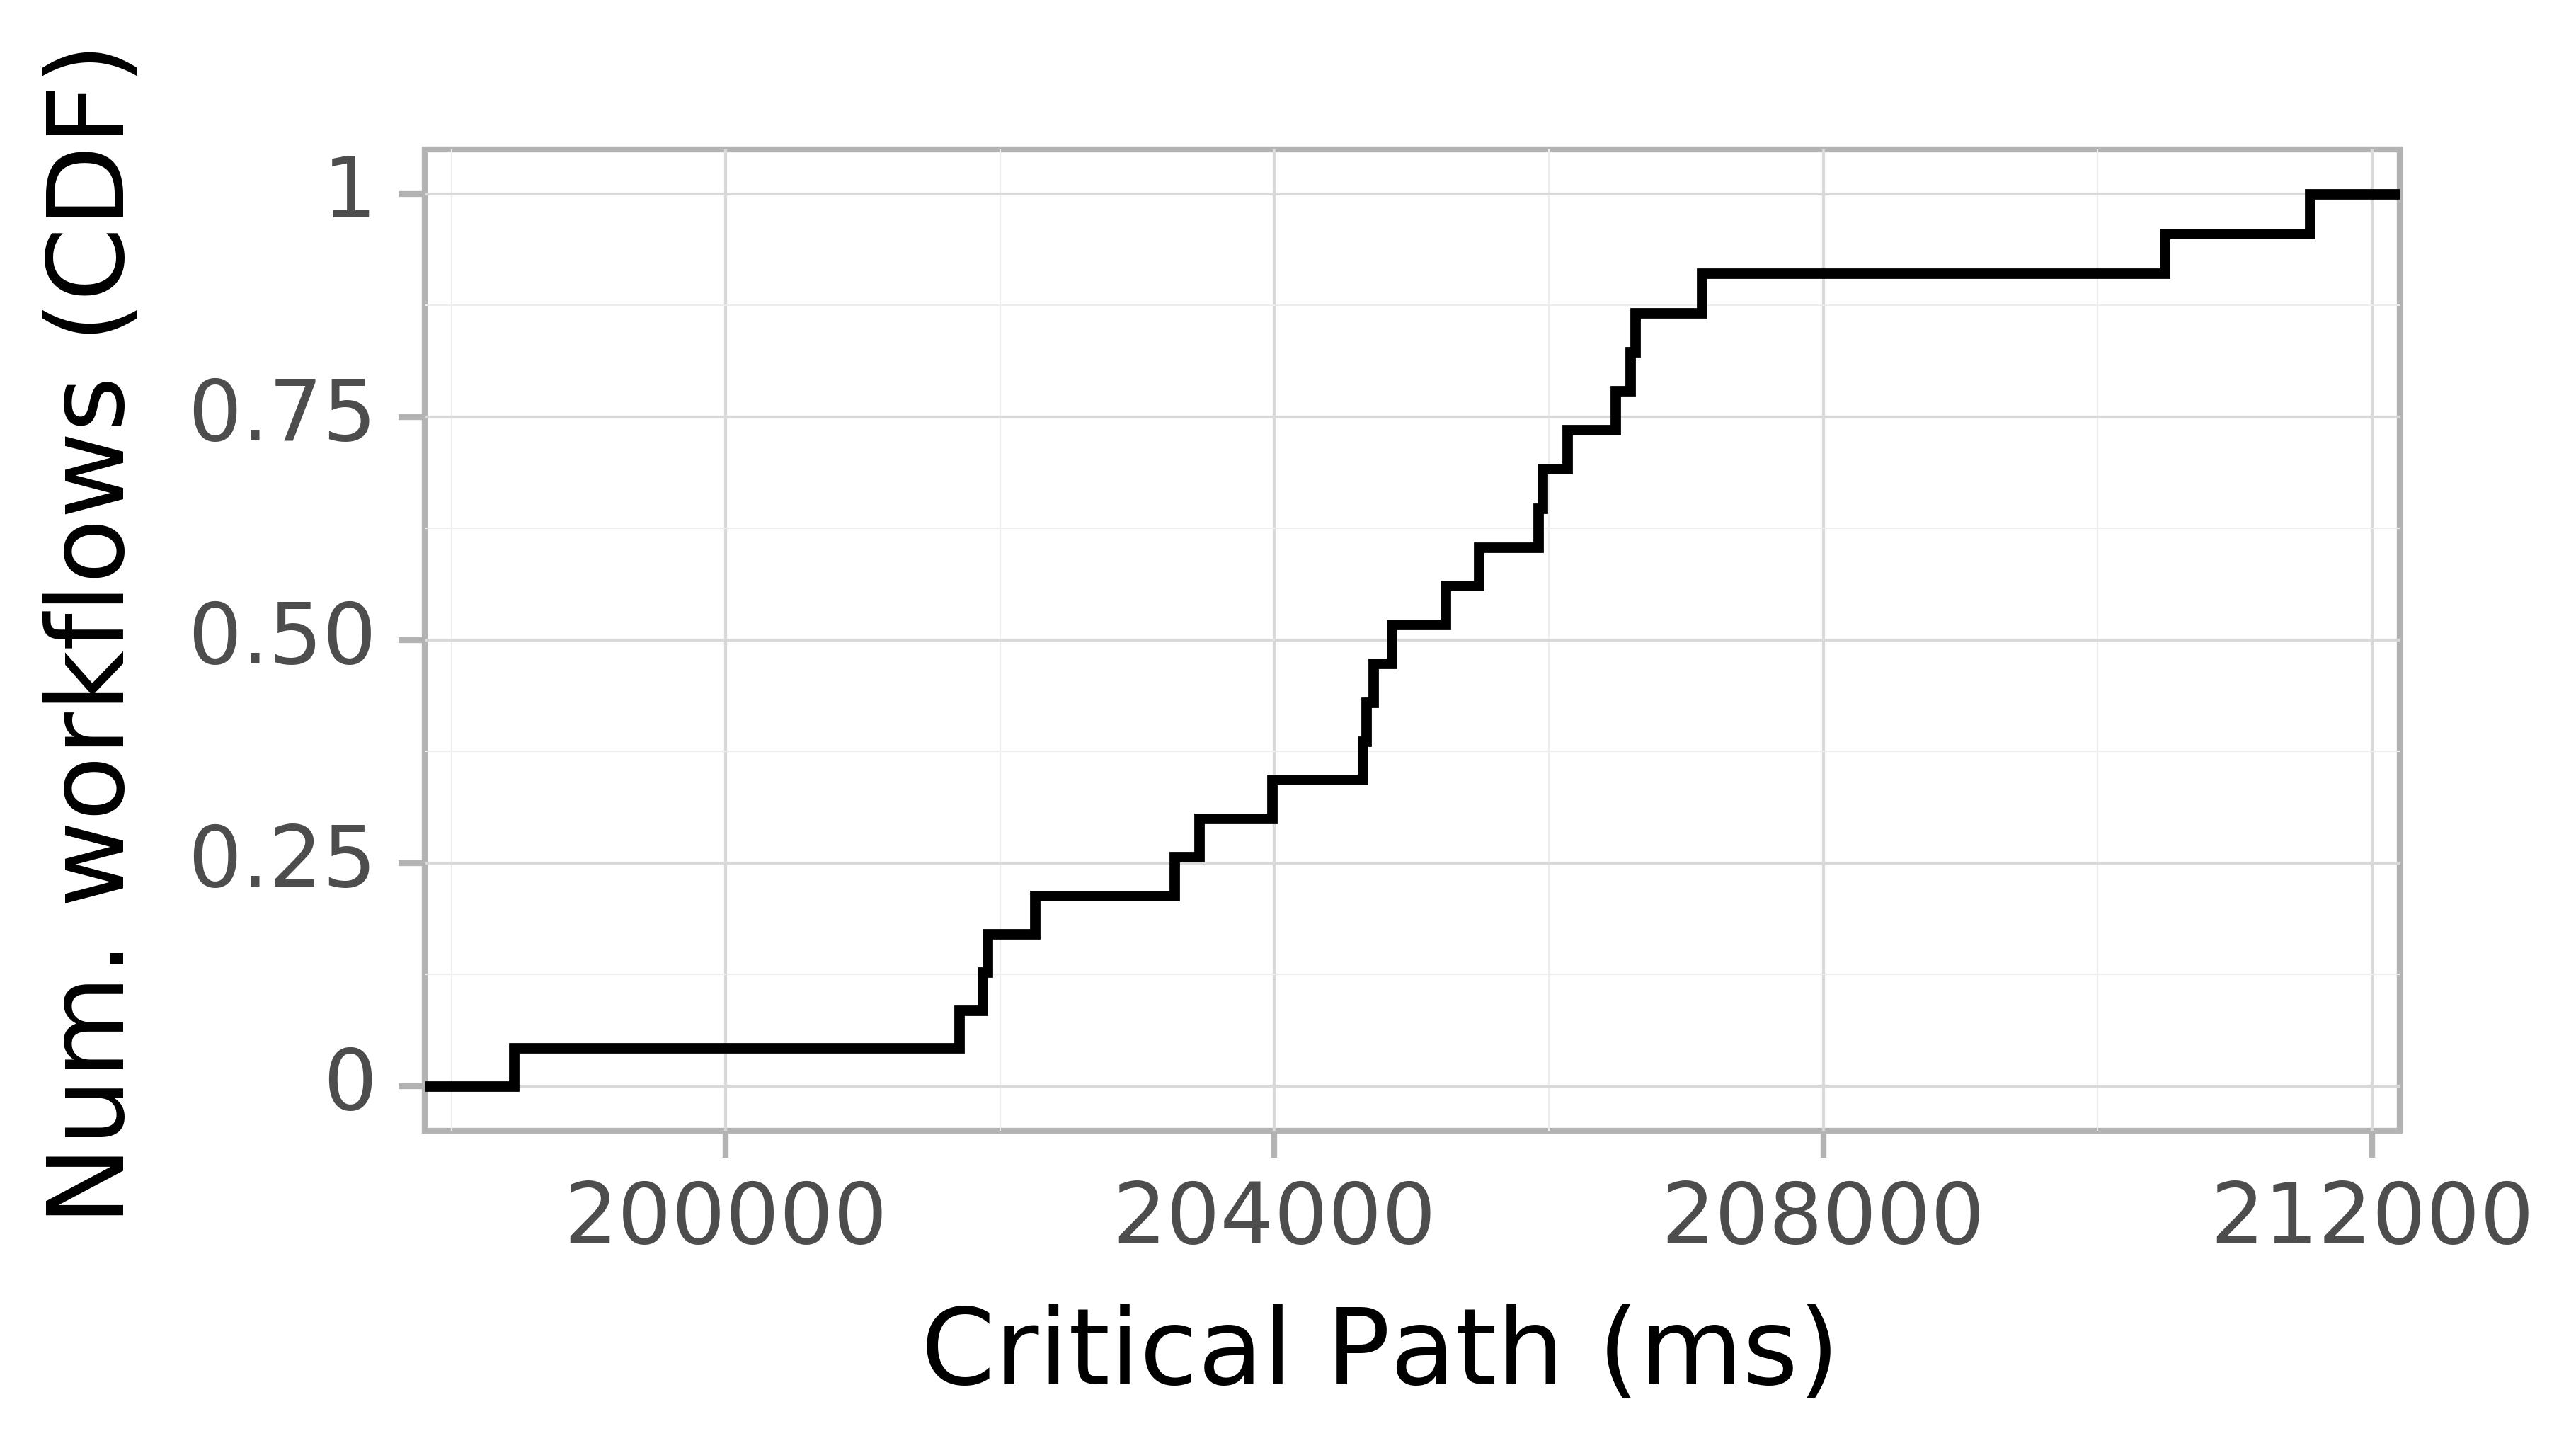 Job runtime CDF graph for the askalon-new_ee25 trace.